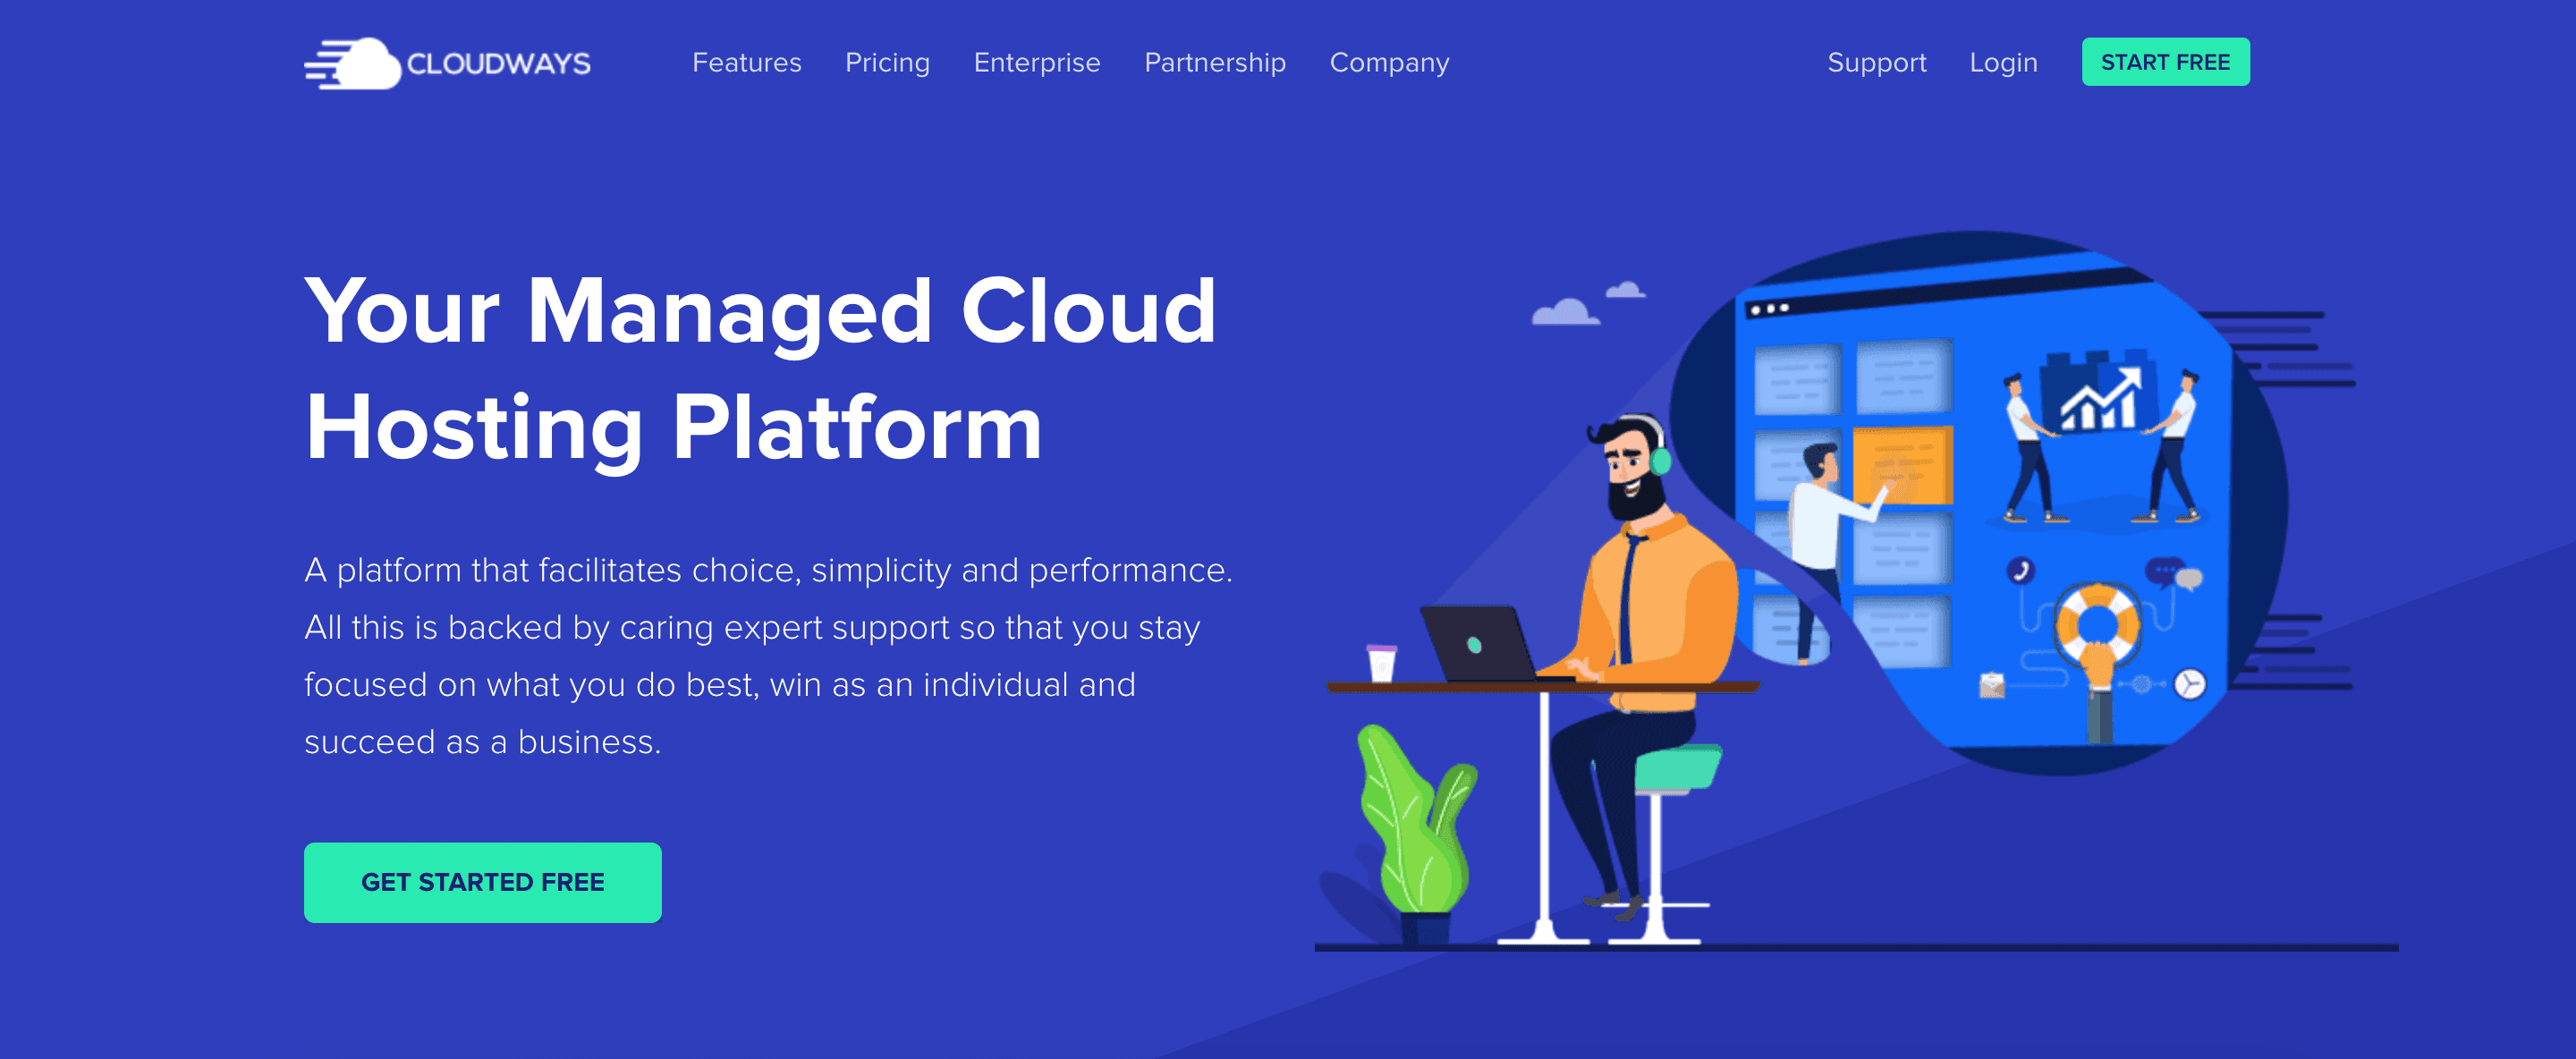 Cloudways overview